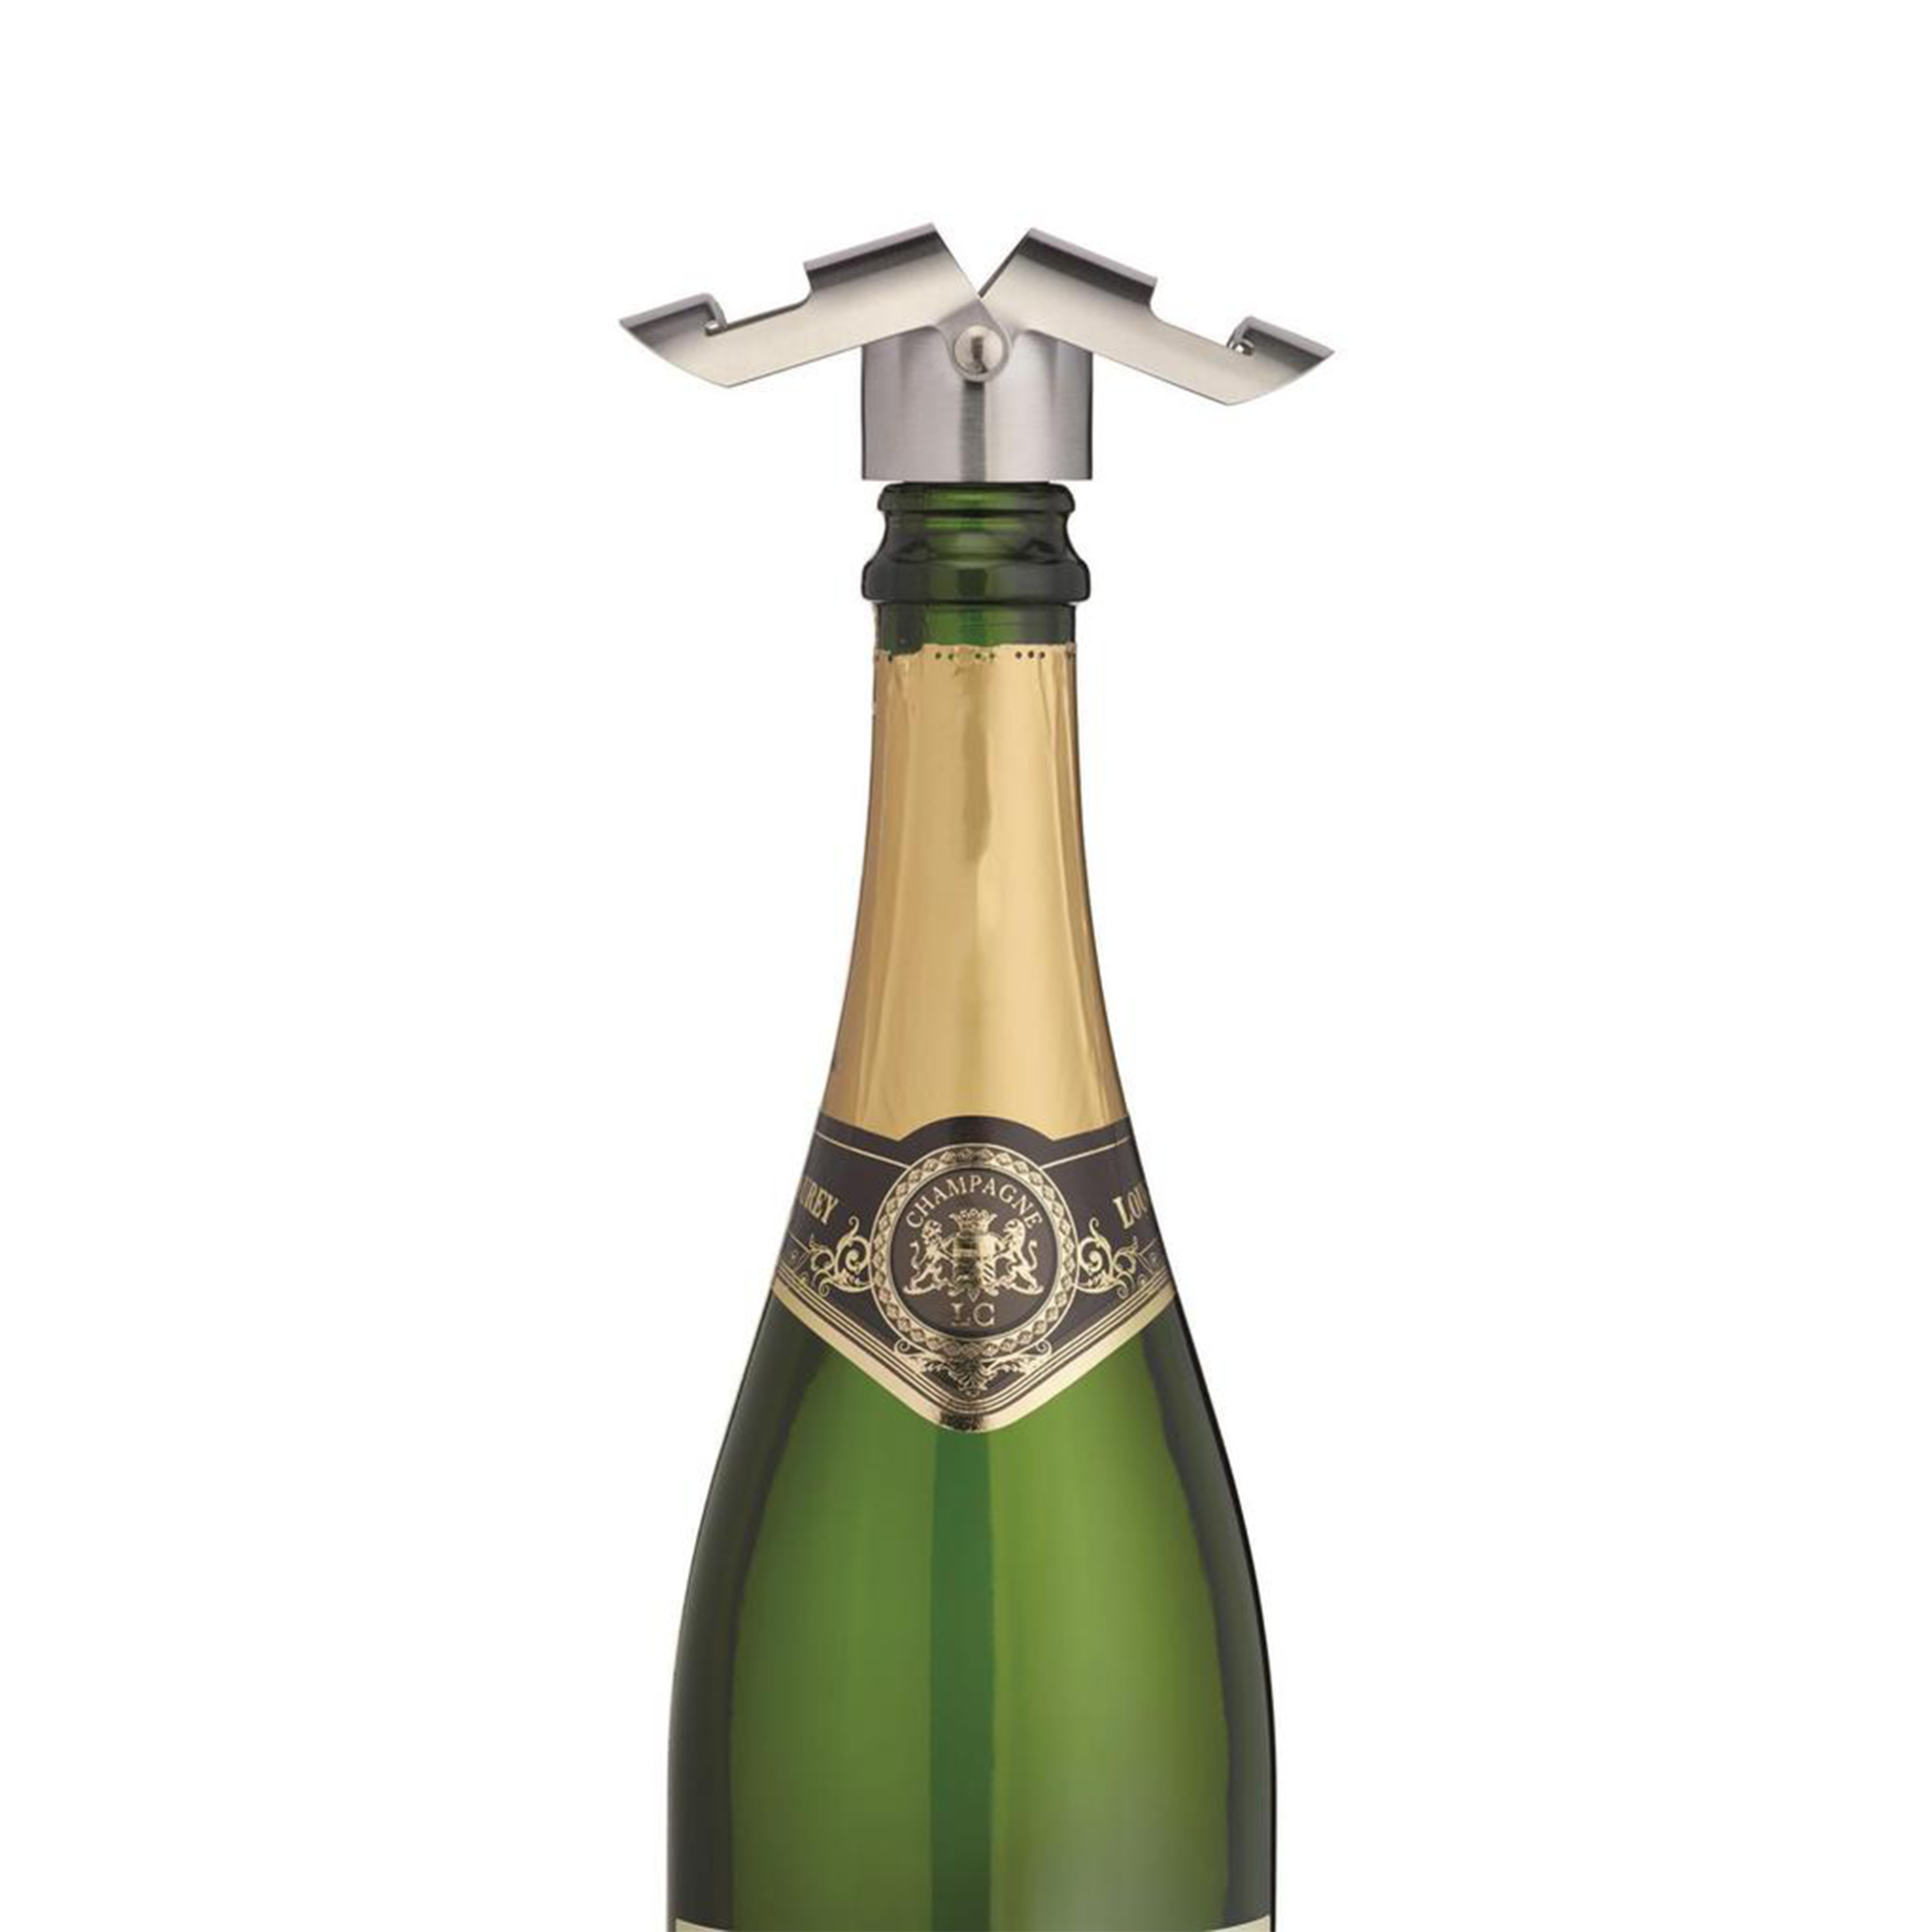 the stopper being used on a bottle of champagne